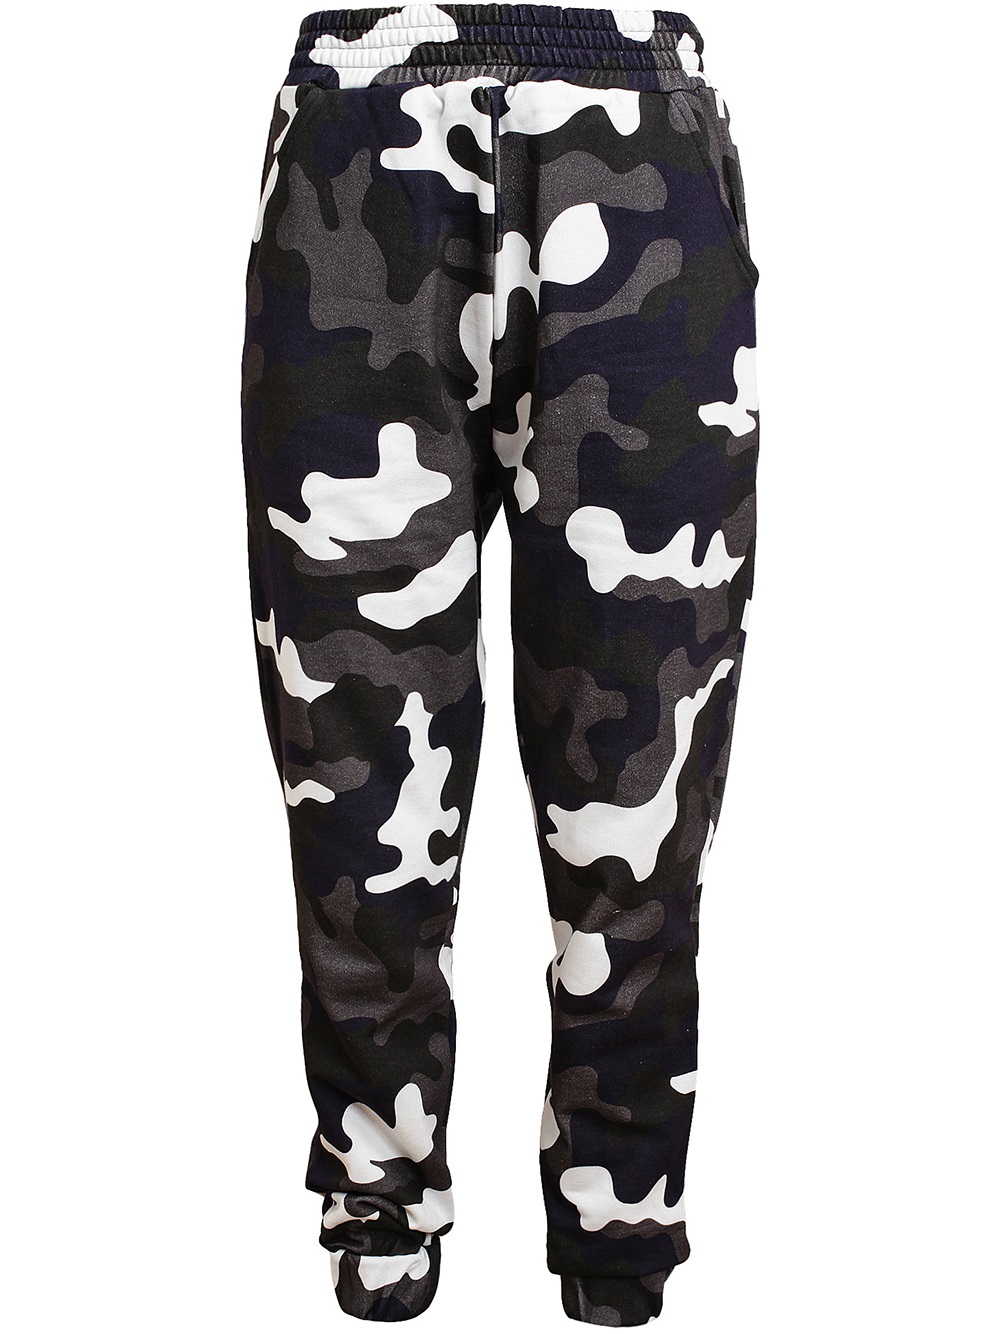 Lyst - Christopher kane Camouflage Printed Jersey Sweatshirt Pants in Gray